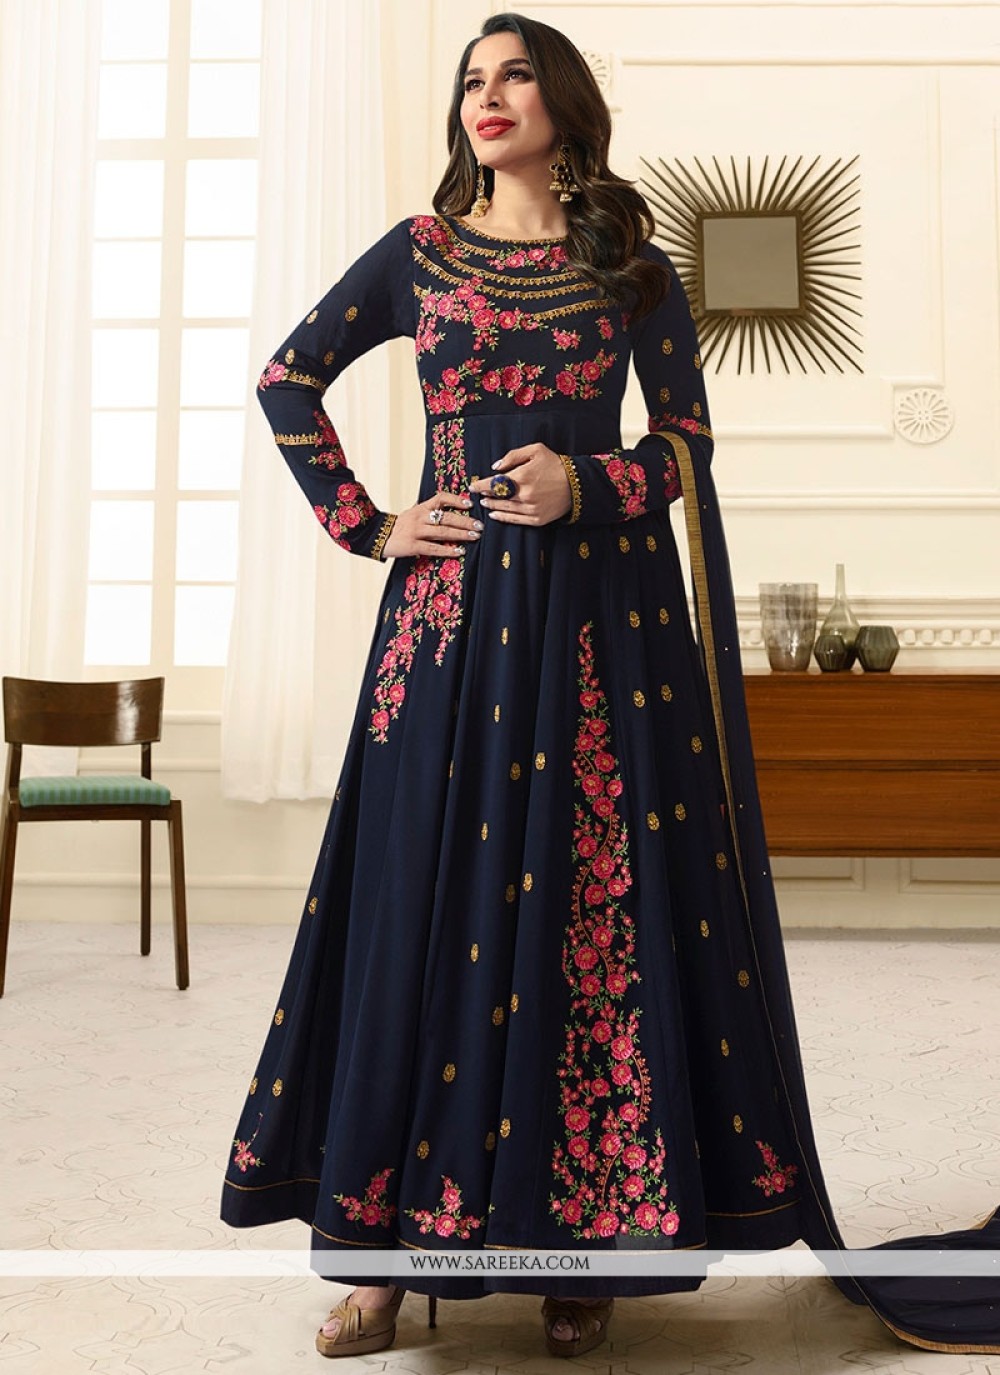 Sophie Chaudhary Faux Georgette Embroidered Work Floor Length Anarkali Suit